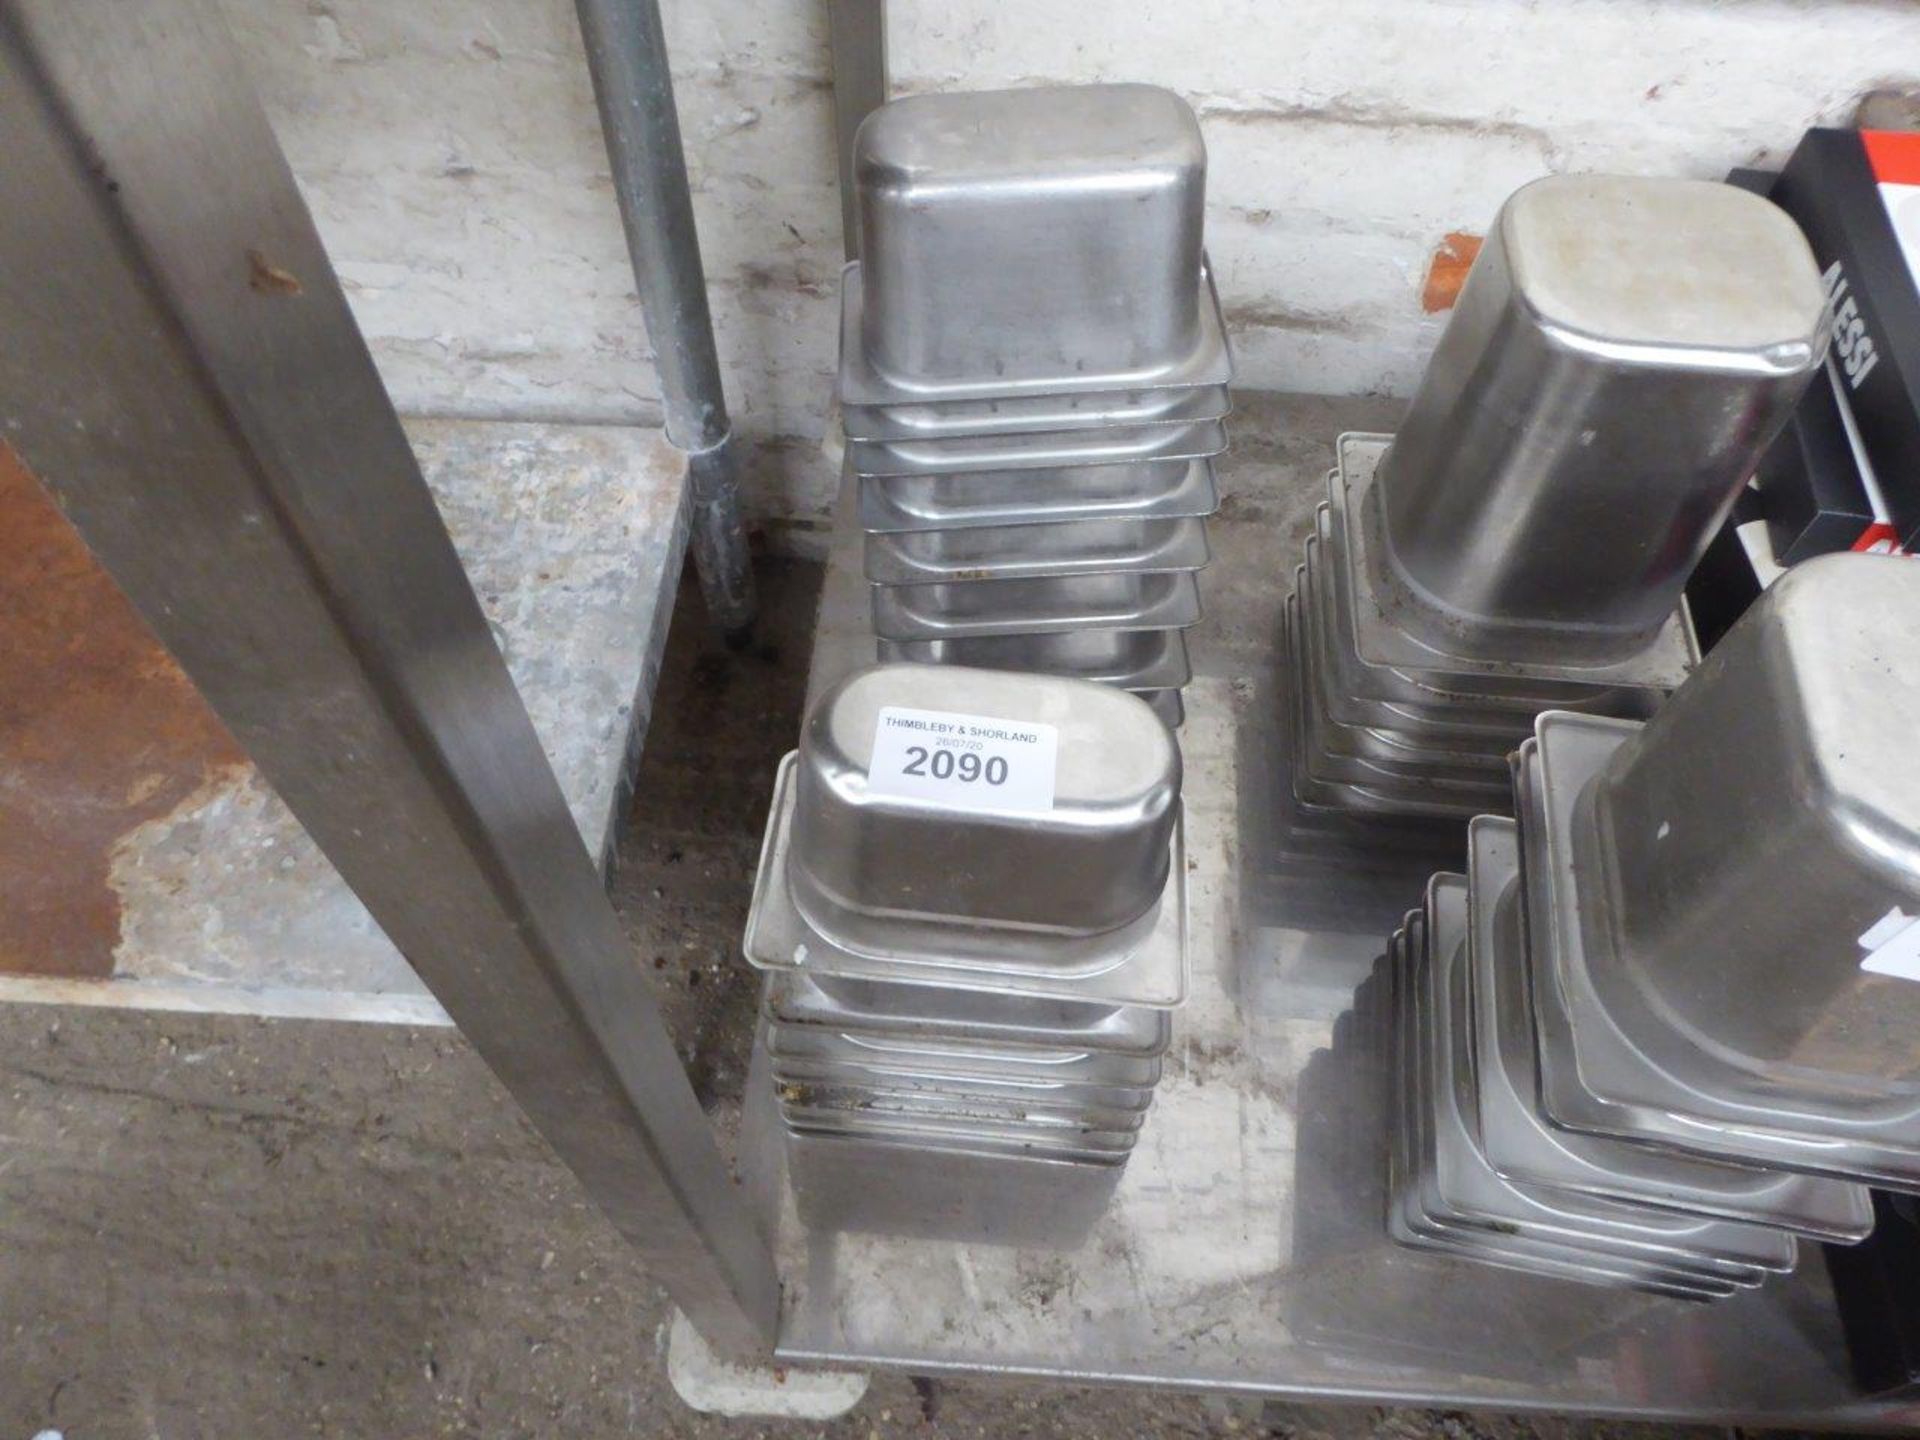 16 stainless steel gastronome pots